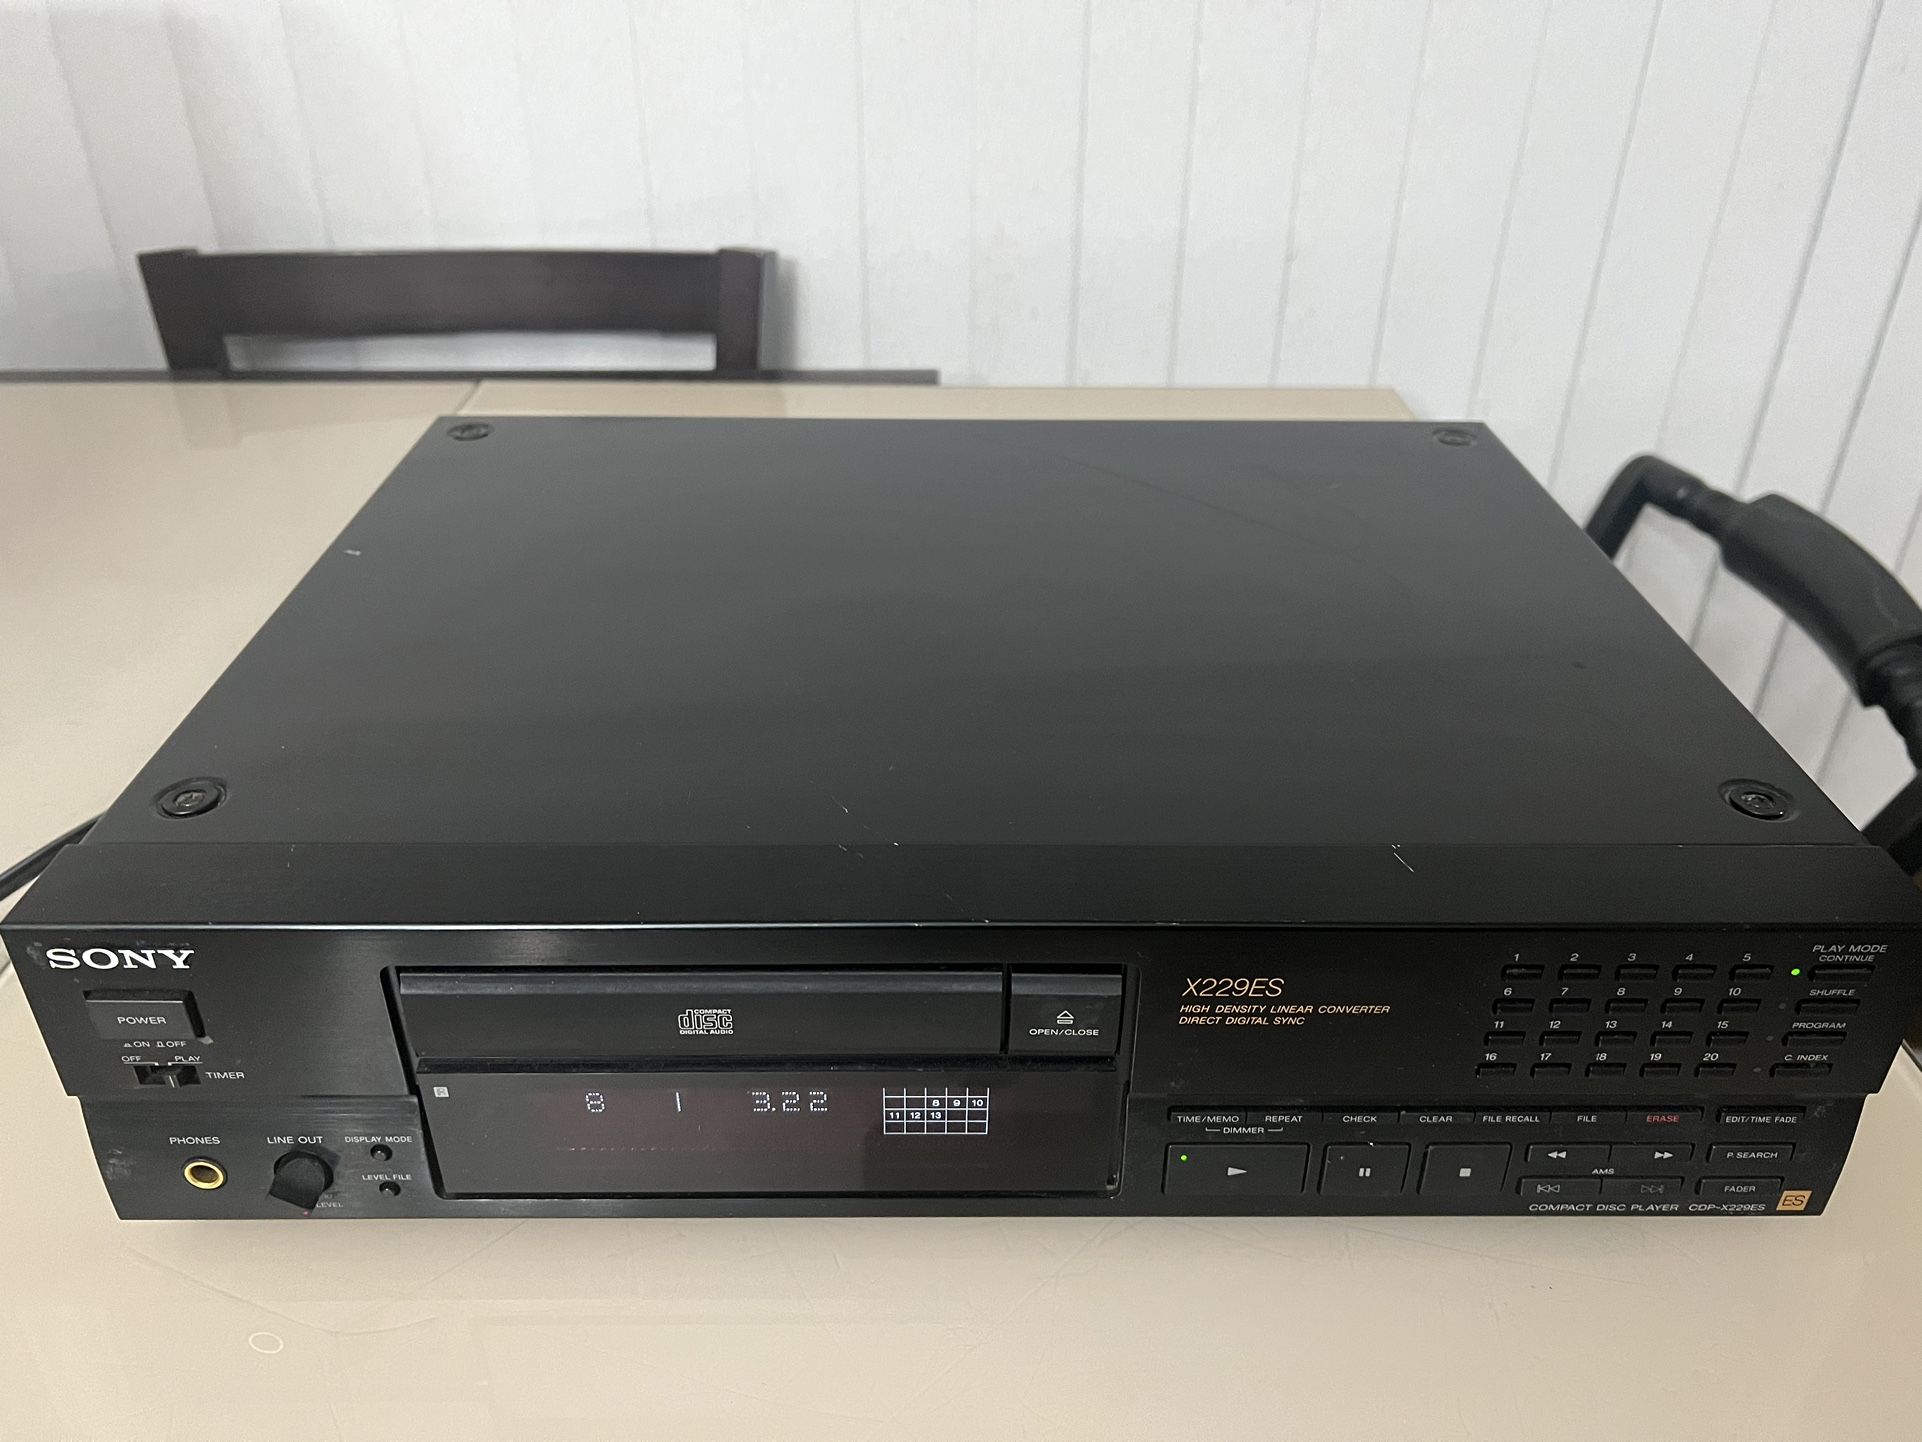 Sony CDP-X229ES Digital Sync Optical Out Linear Converter CD Player. Used in good cosmetic condition with some cosmetic blemishes. There are a few scr